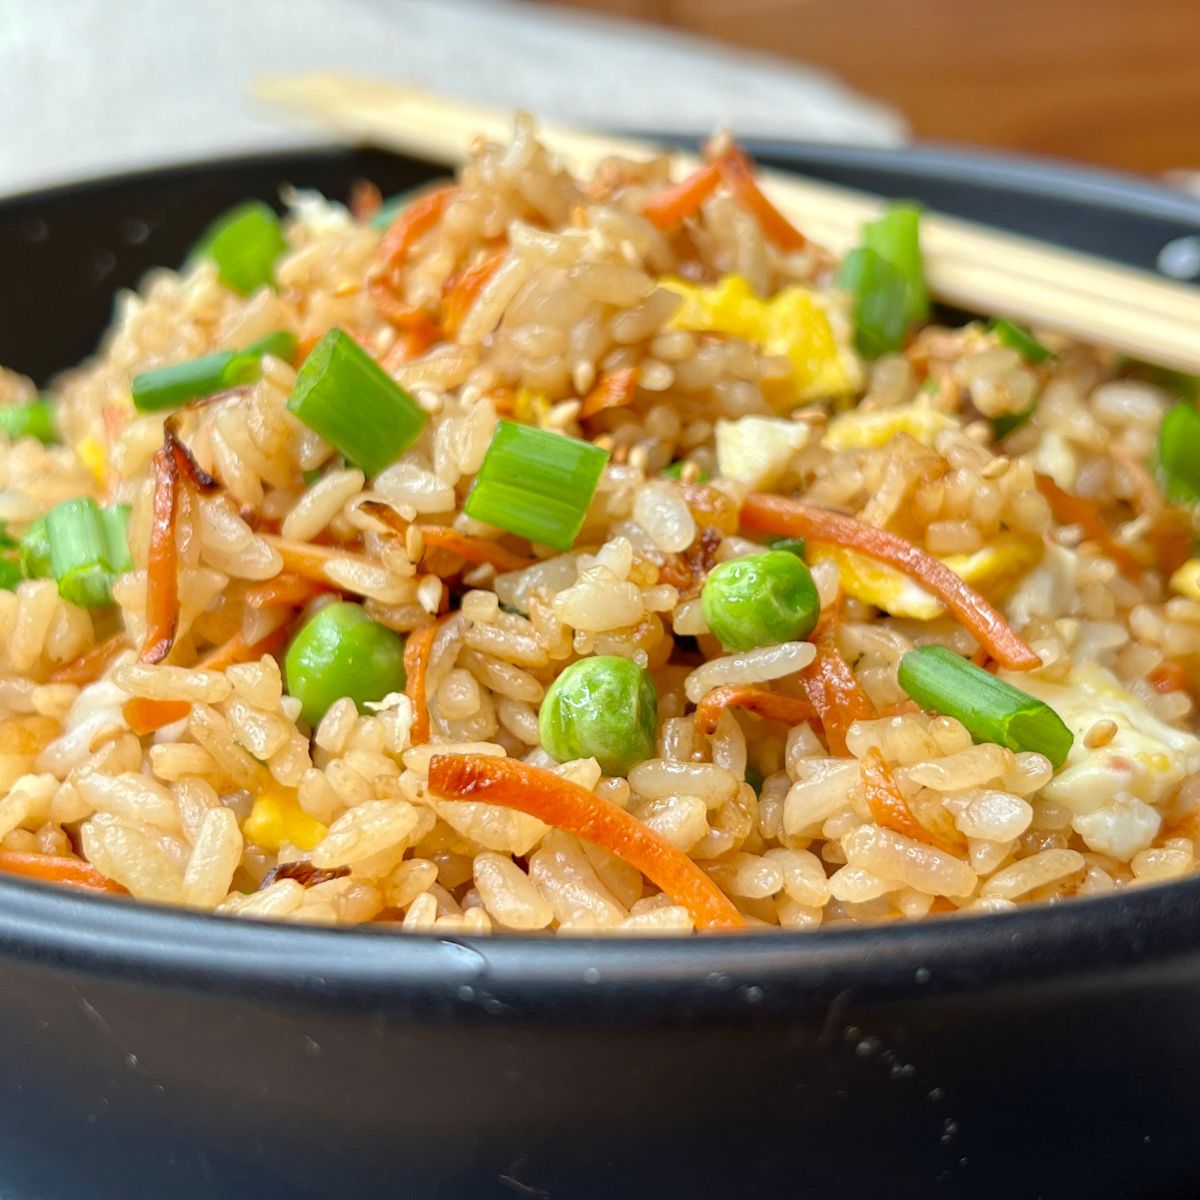 A bowl of healthy fried rice with peas carrots and scallions